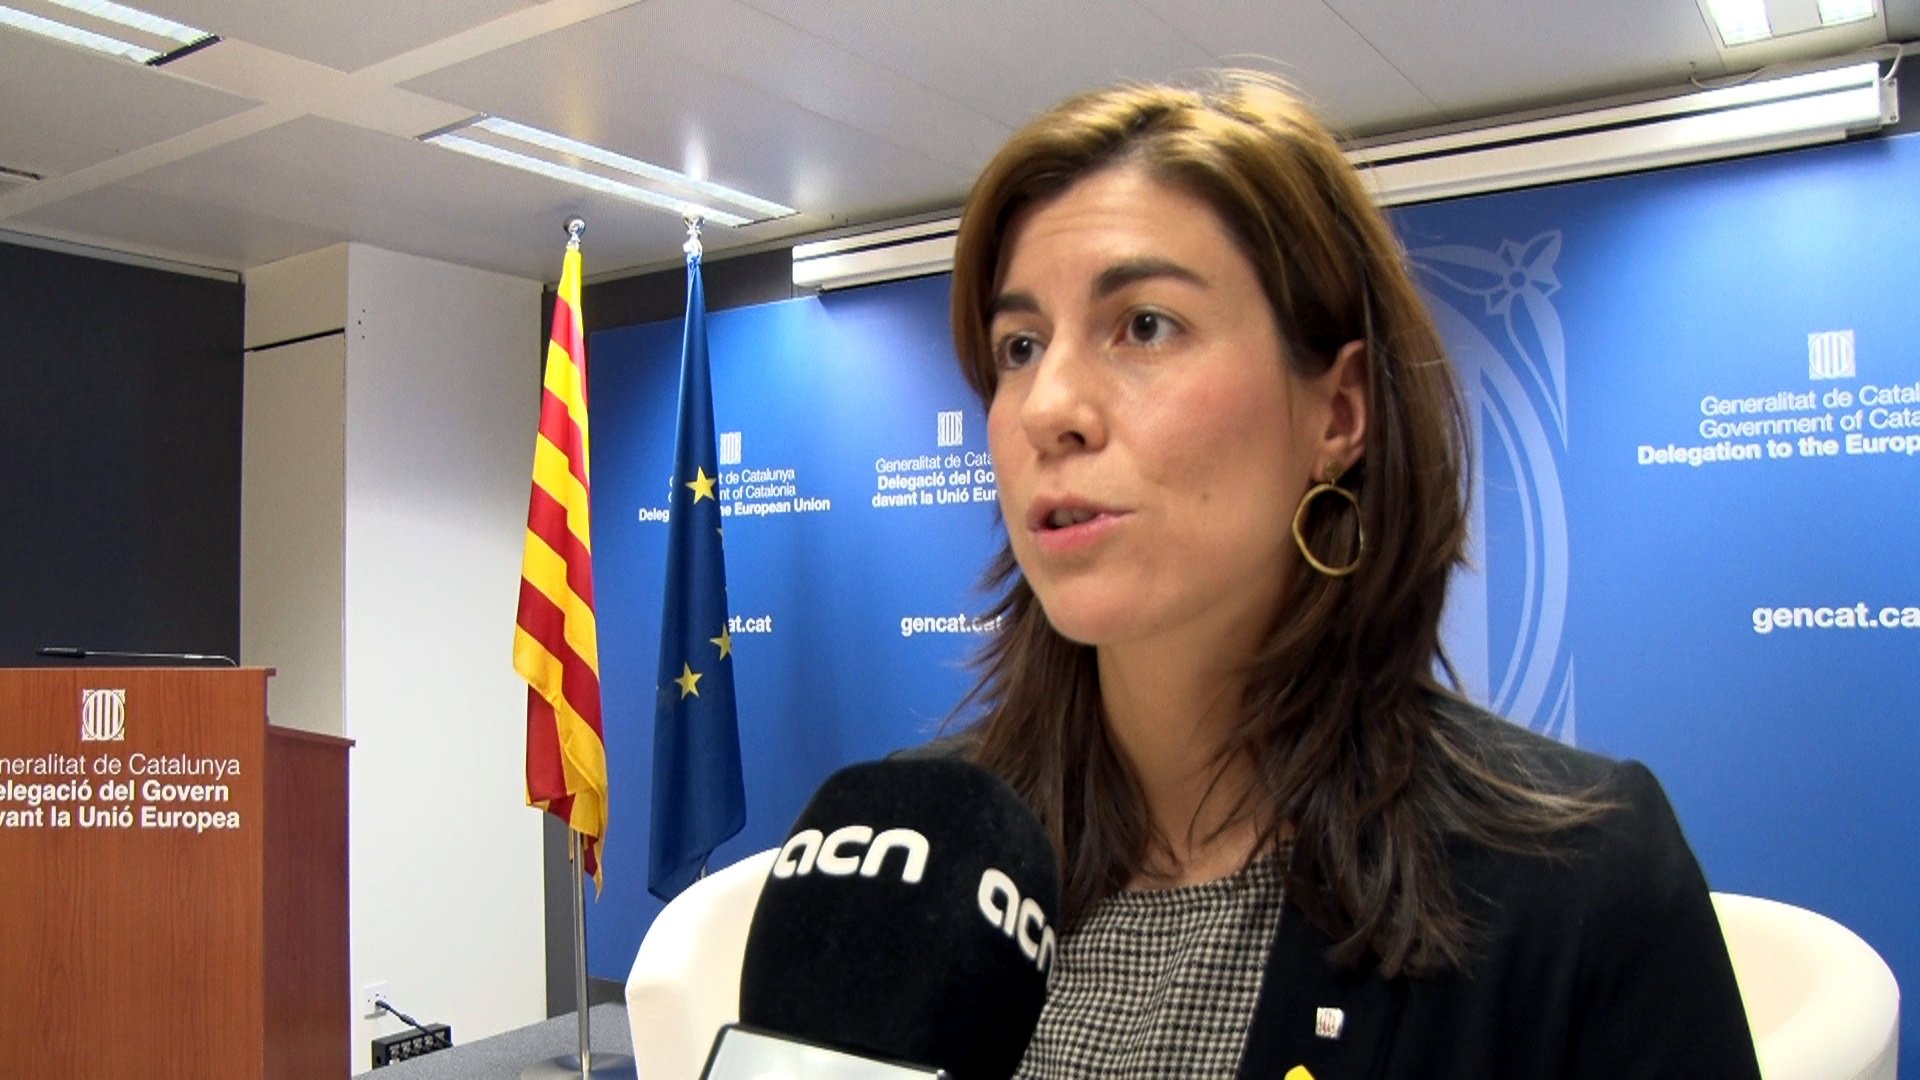 Catalan government proposes mechanism for an independent Catalonia to join the EU